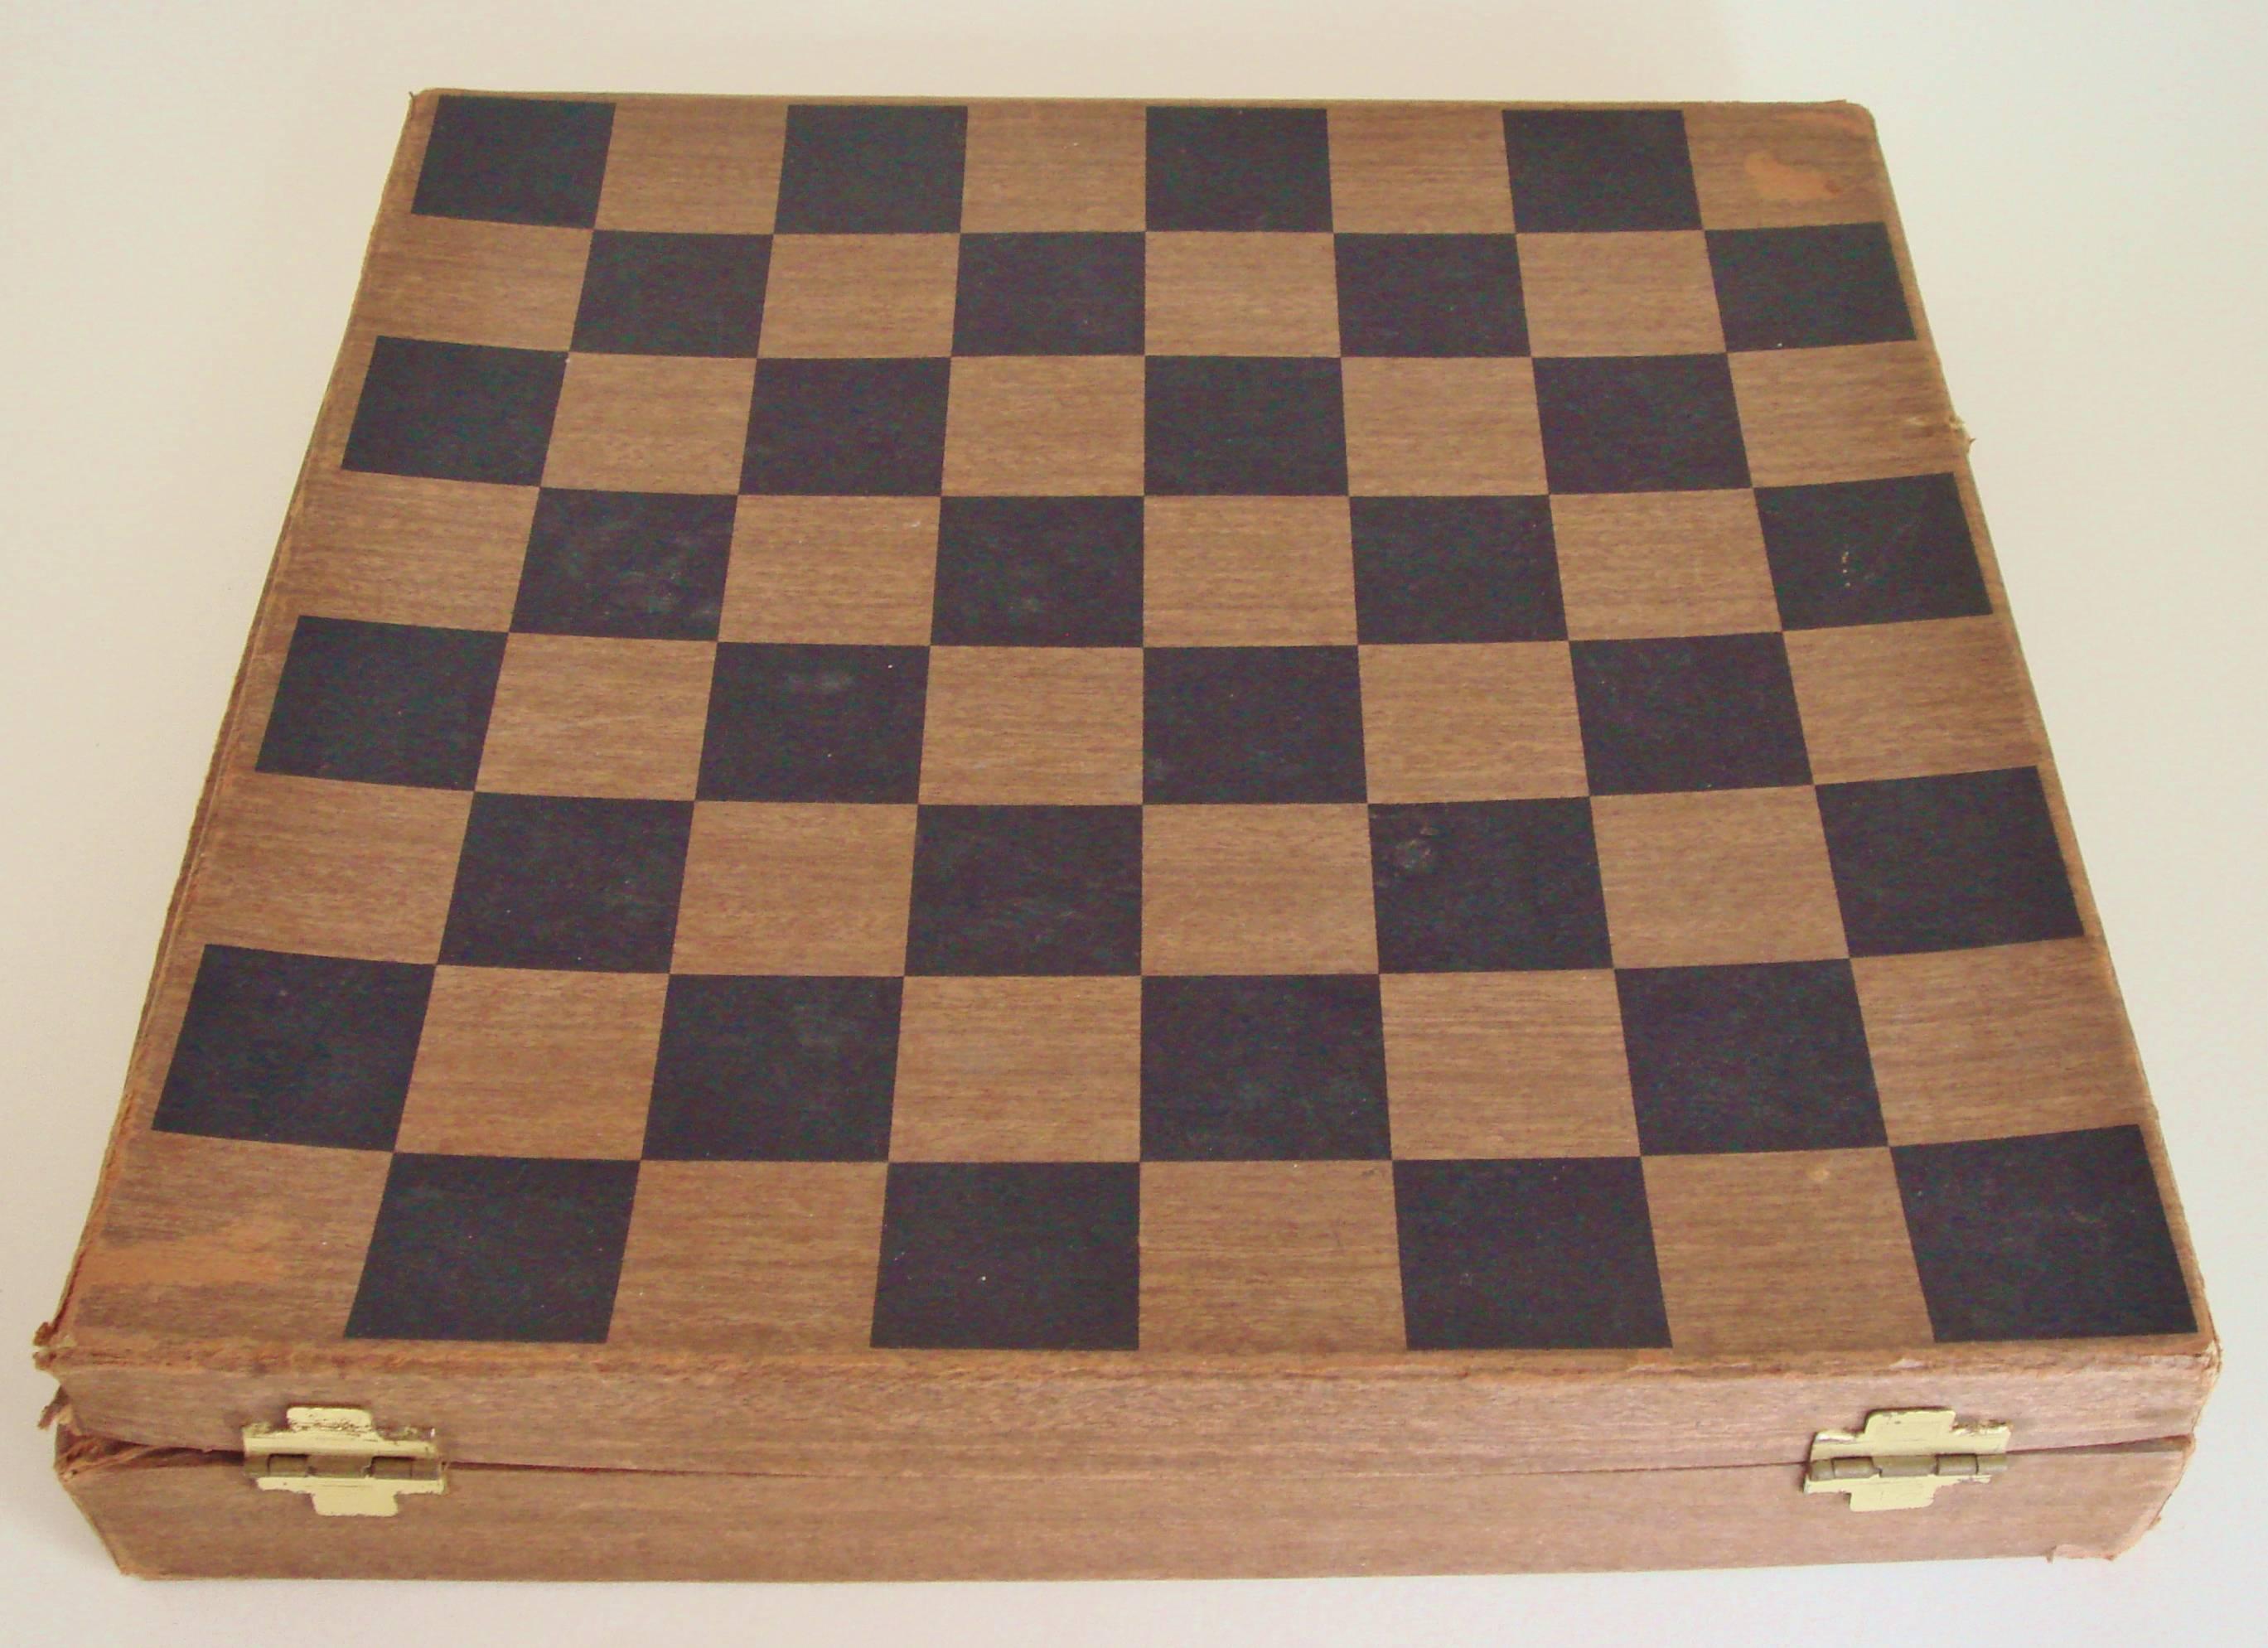 Mid-20th Century American Boxed Chess Set 'Chess-Nuts' by Invento for Hammacher Schlemmer. For Sale